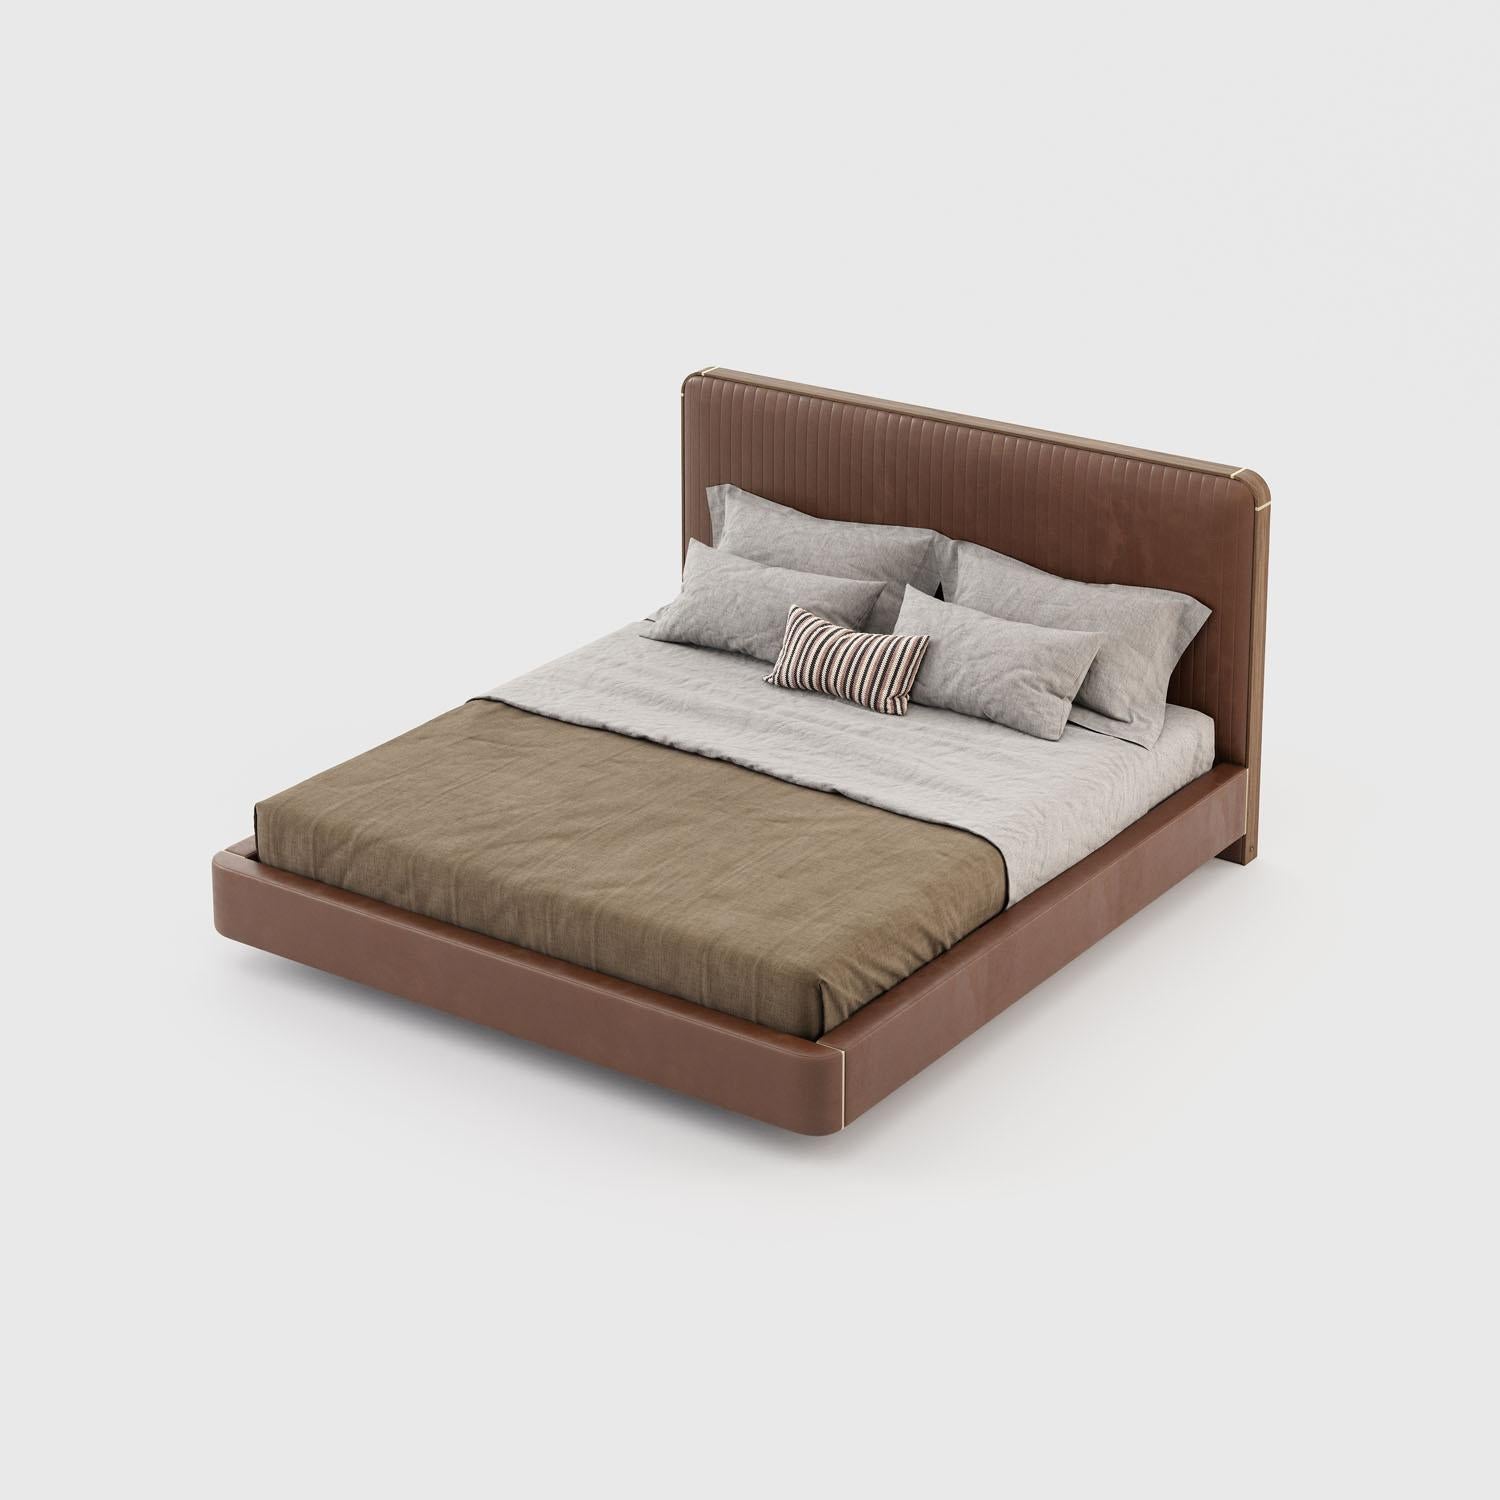 American King size bed made to order in a selection of velvet colors with metal and wood details. A classic and stylish design featuring a soft padded headboard in velvet with contoured frame of wood veneer and metal details. 

Dimensions: 
Width